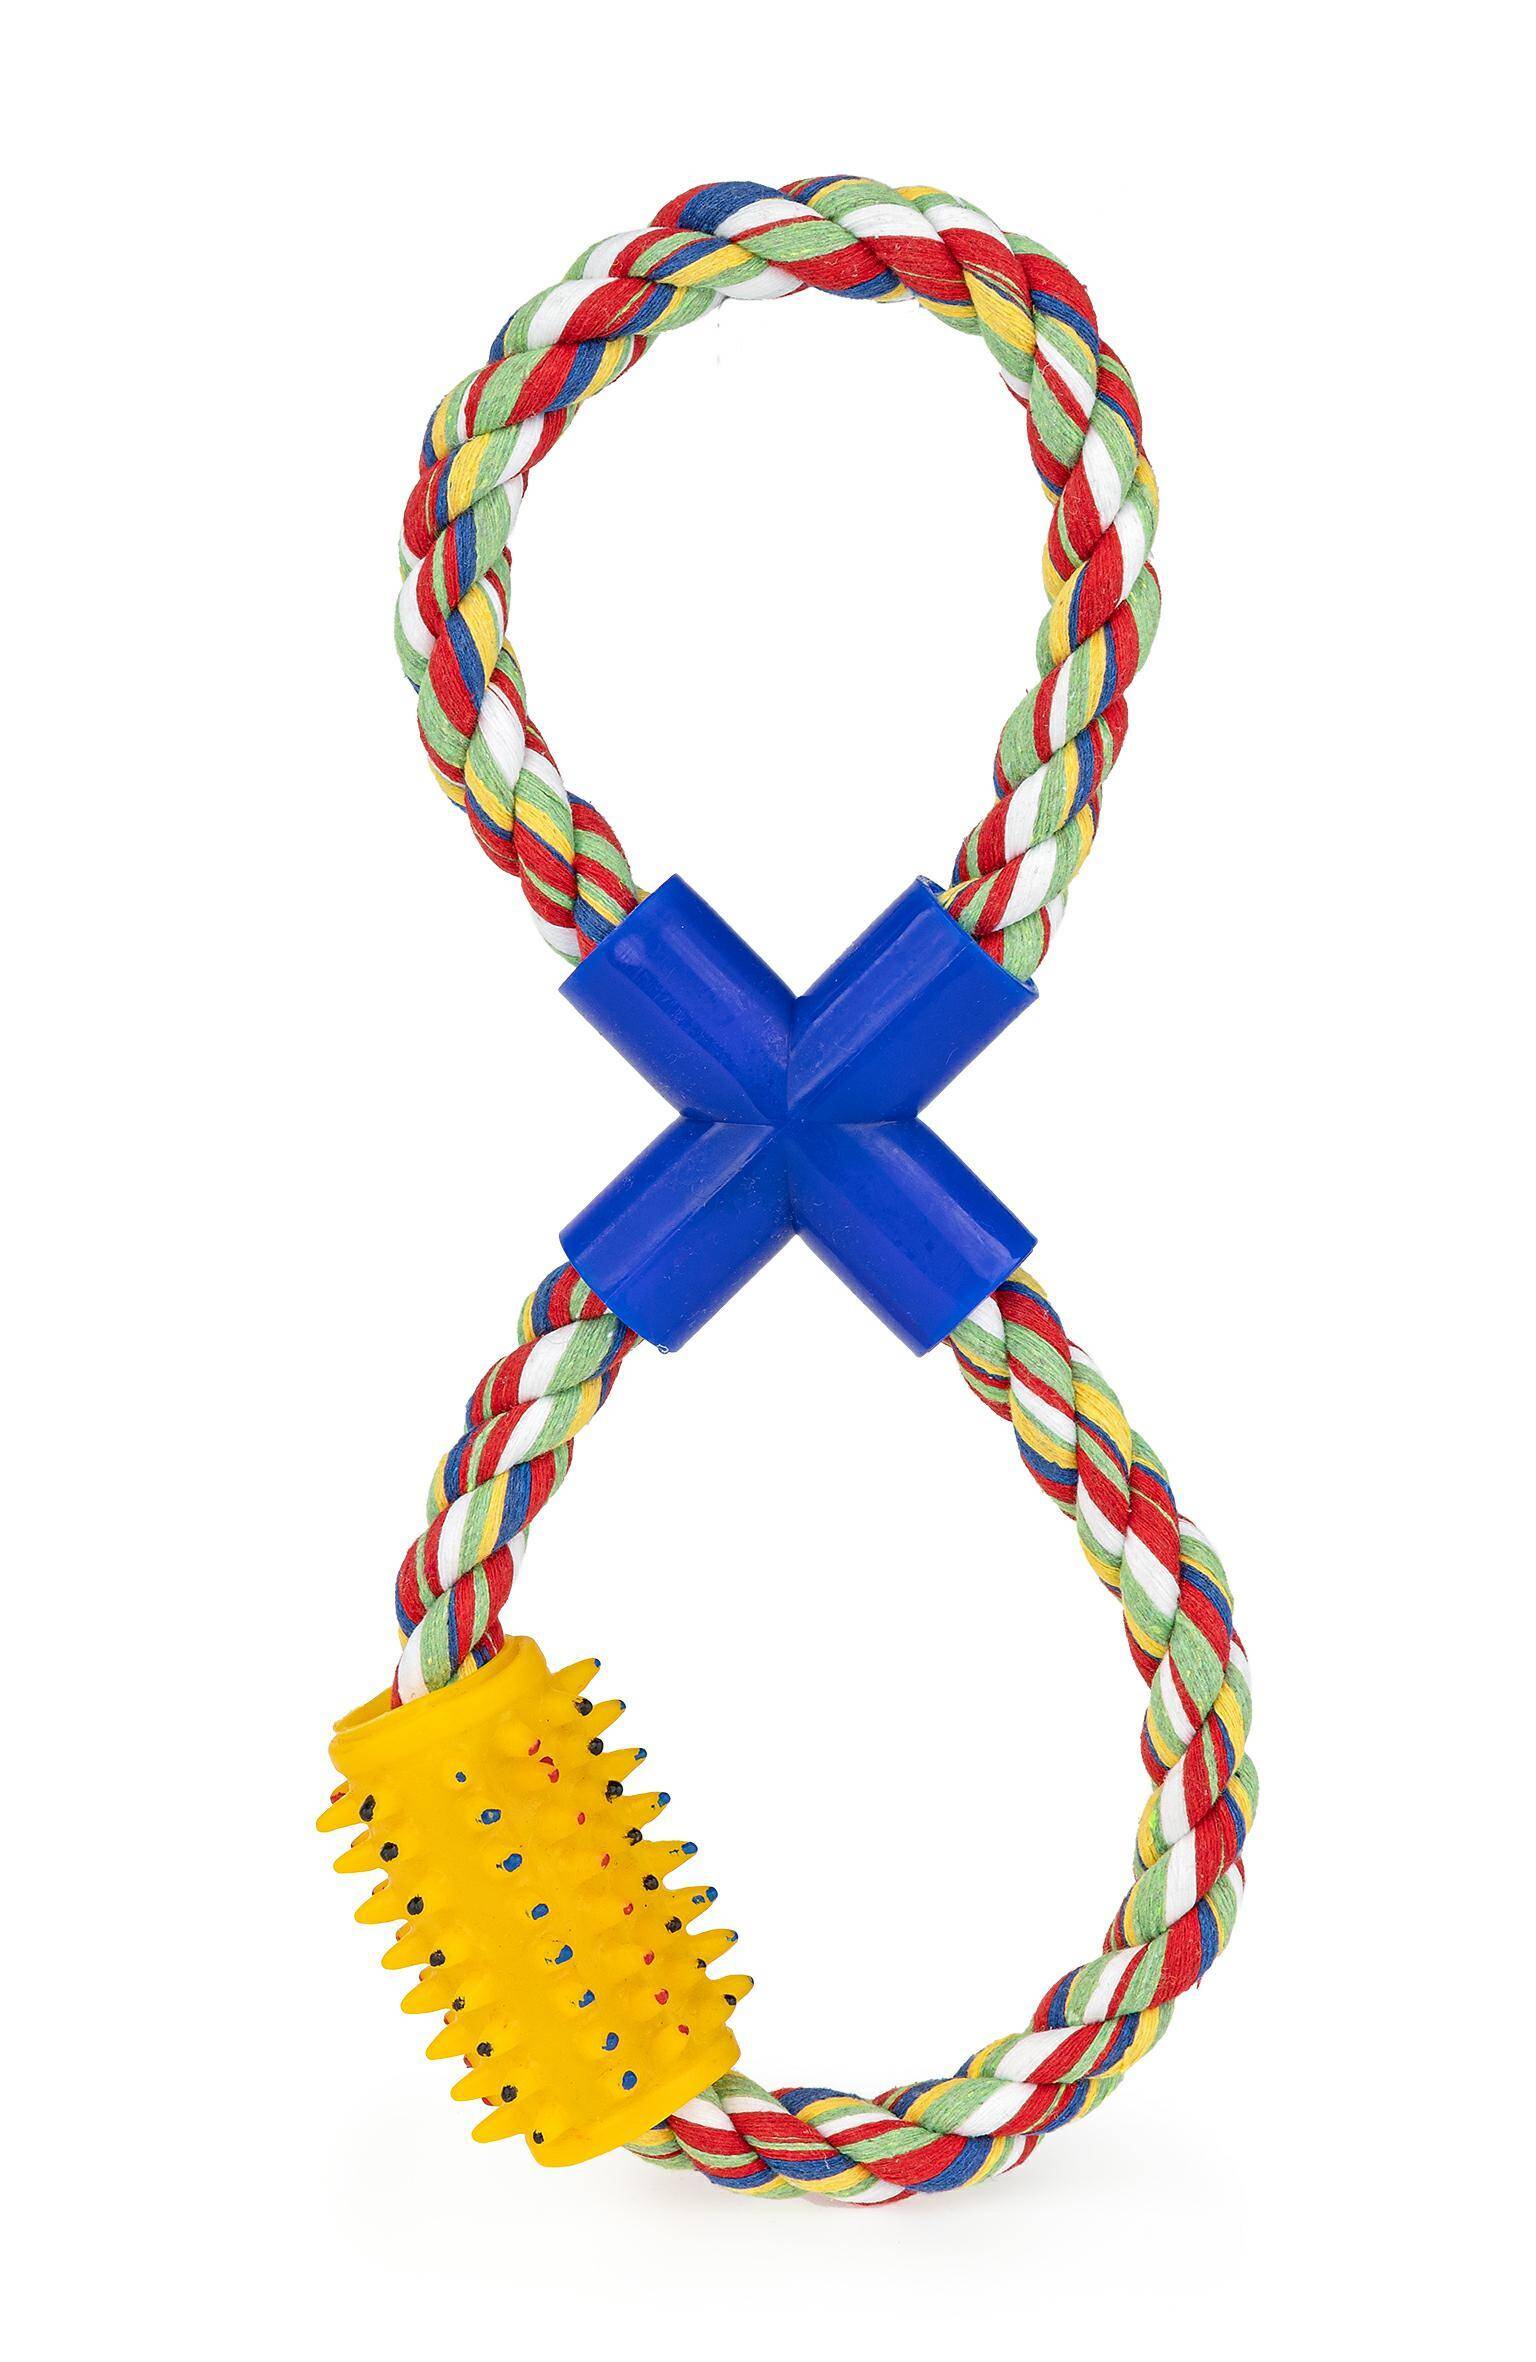 Rope Toy / Eight with Spikes - Happet Z544 - 28cm